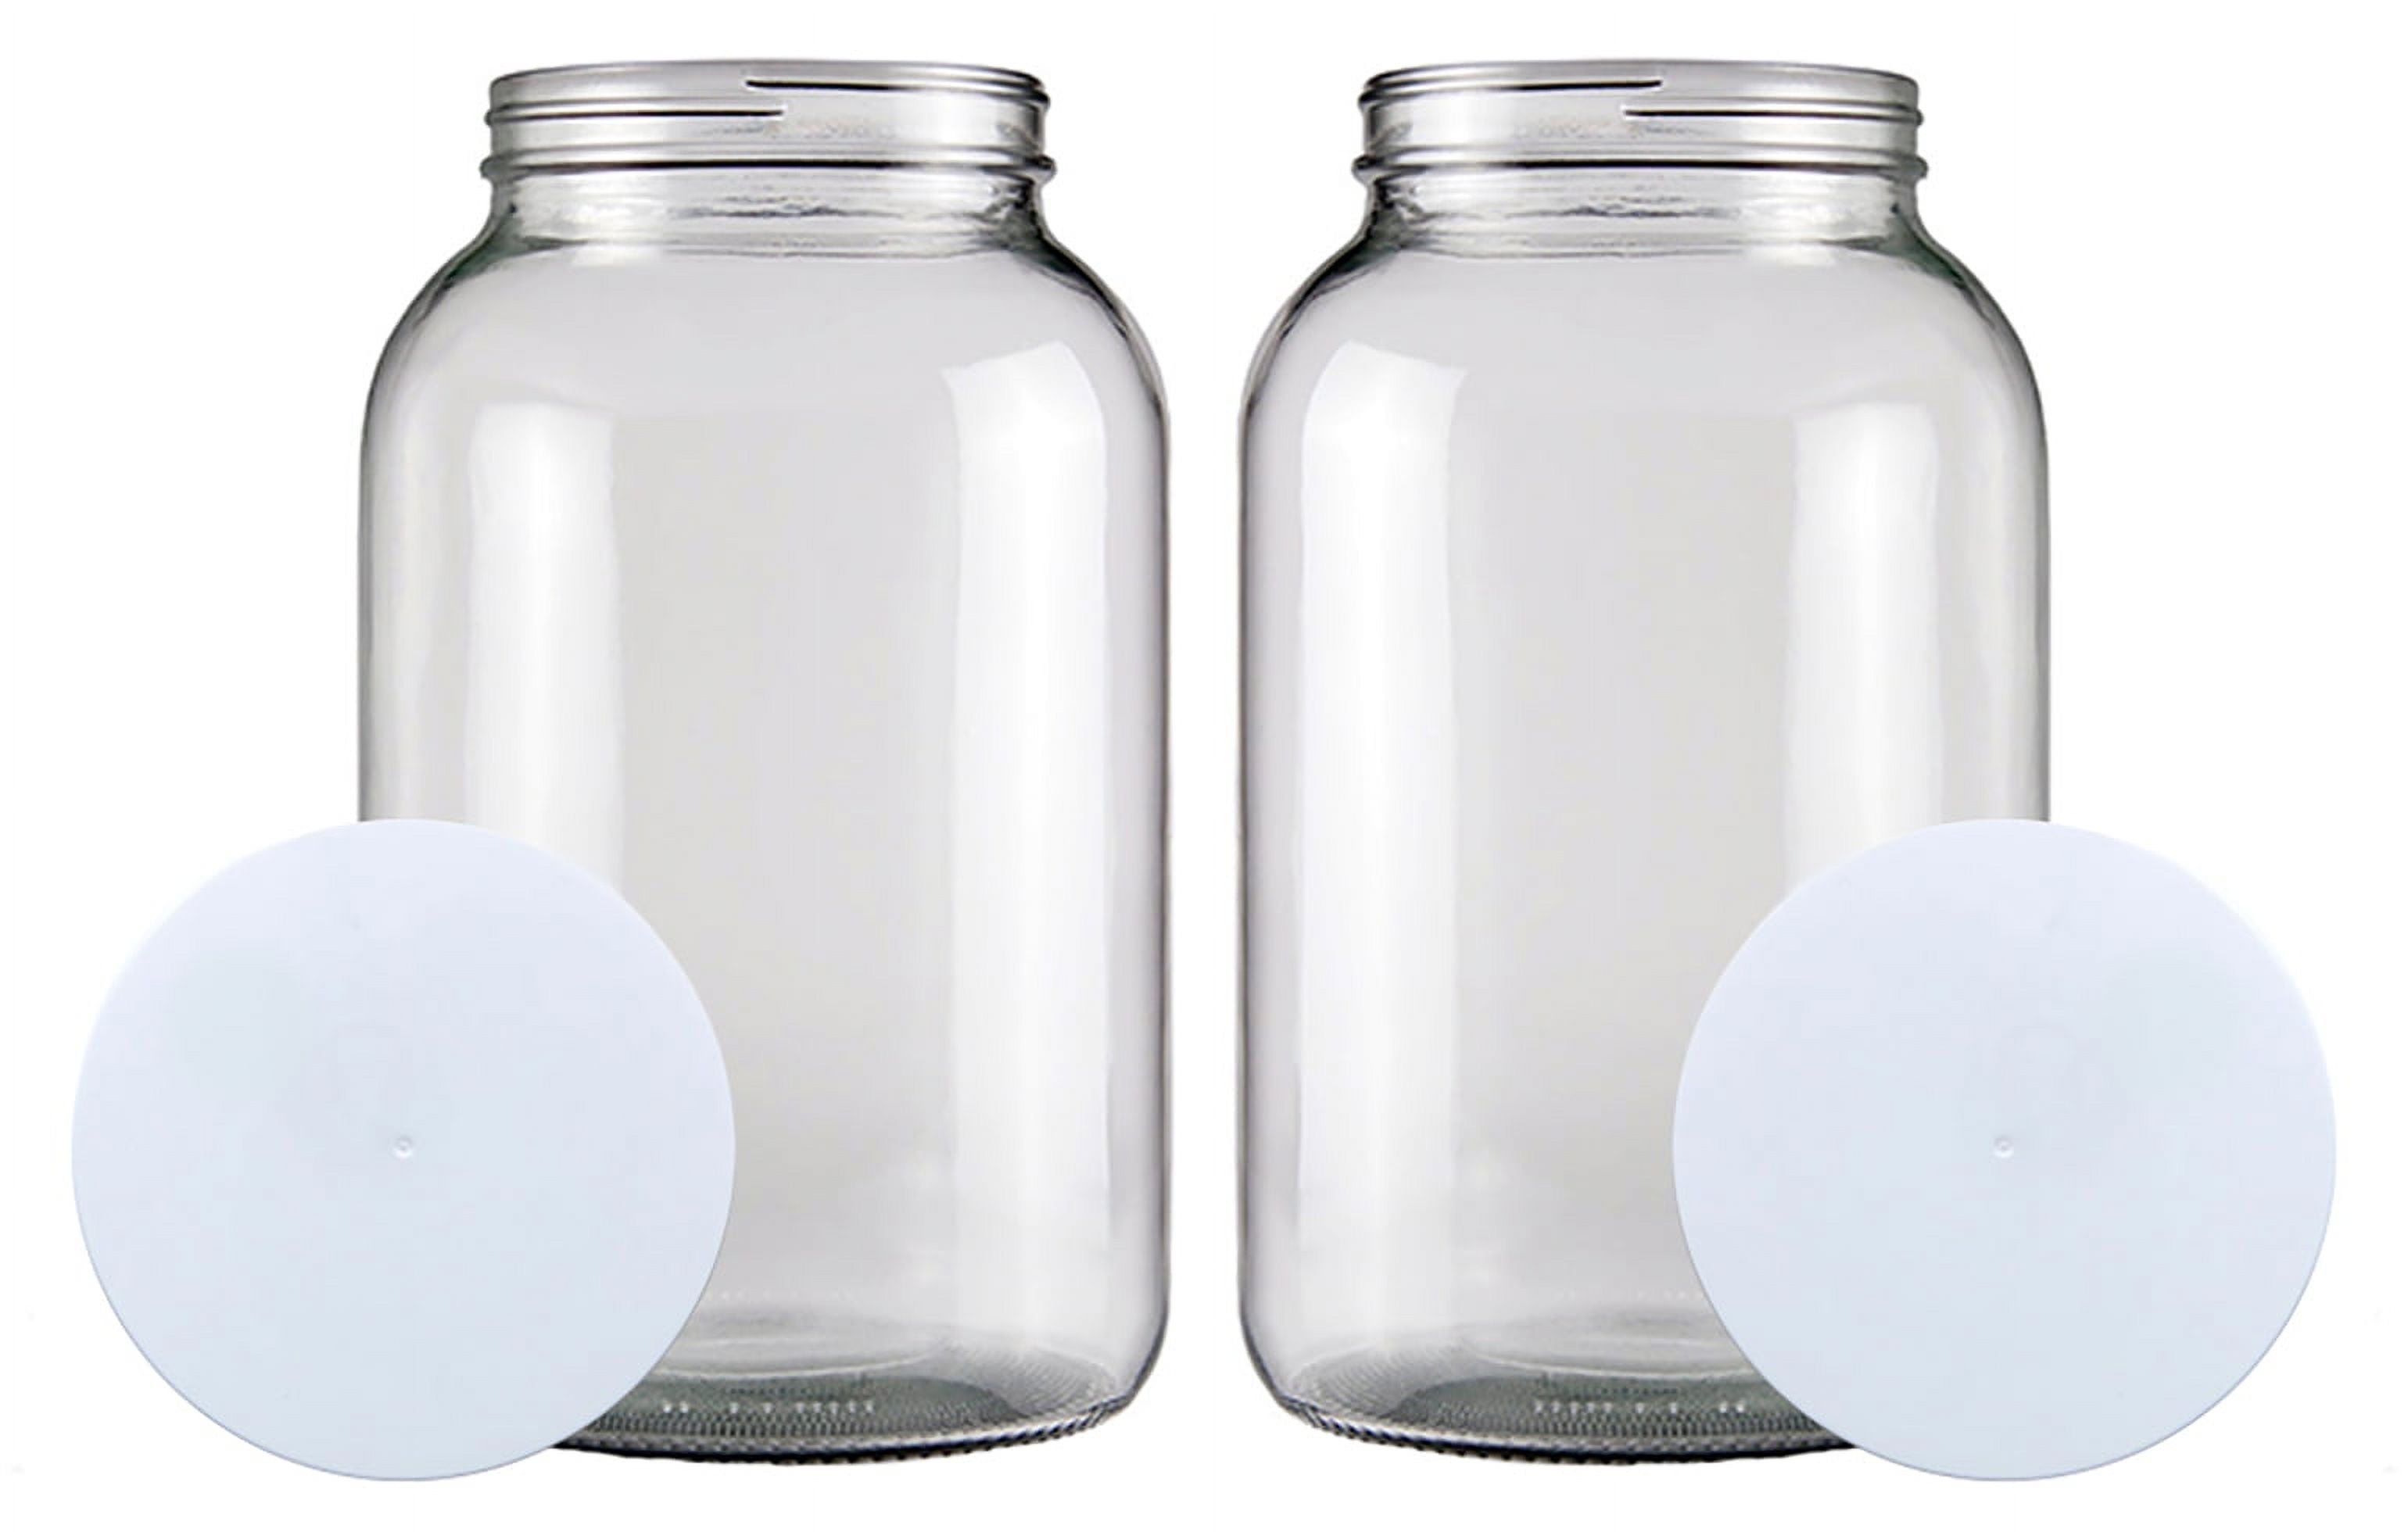 1-gallon Glass Jar Wide Mouth With Airtight Metal Lid USDA